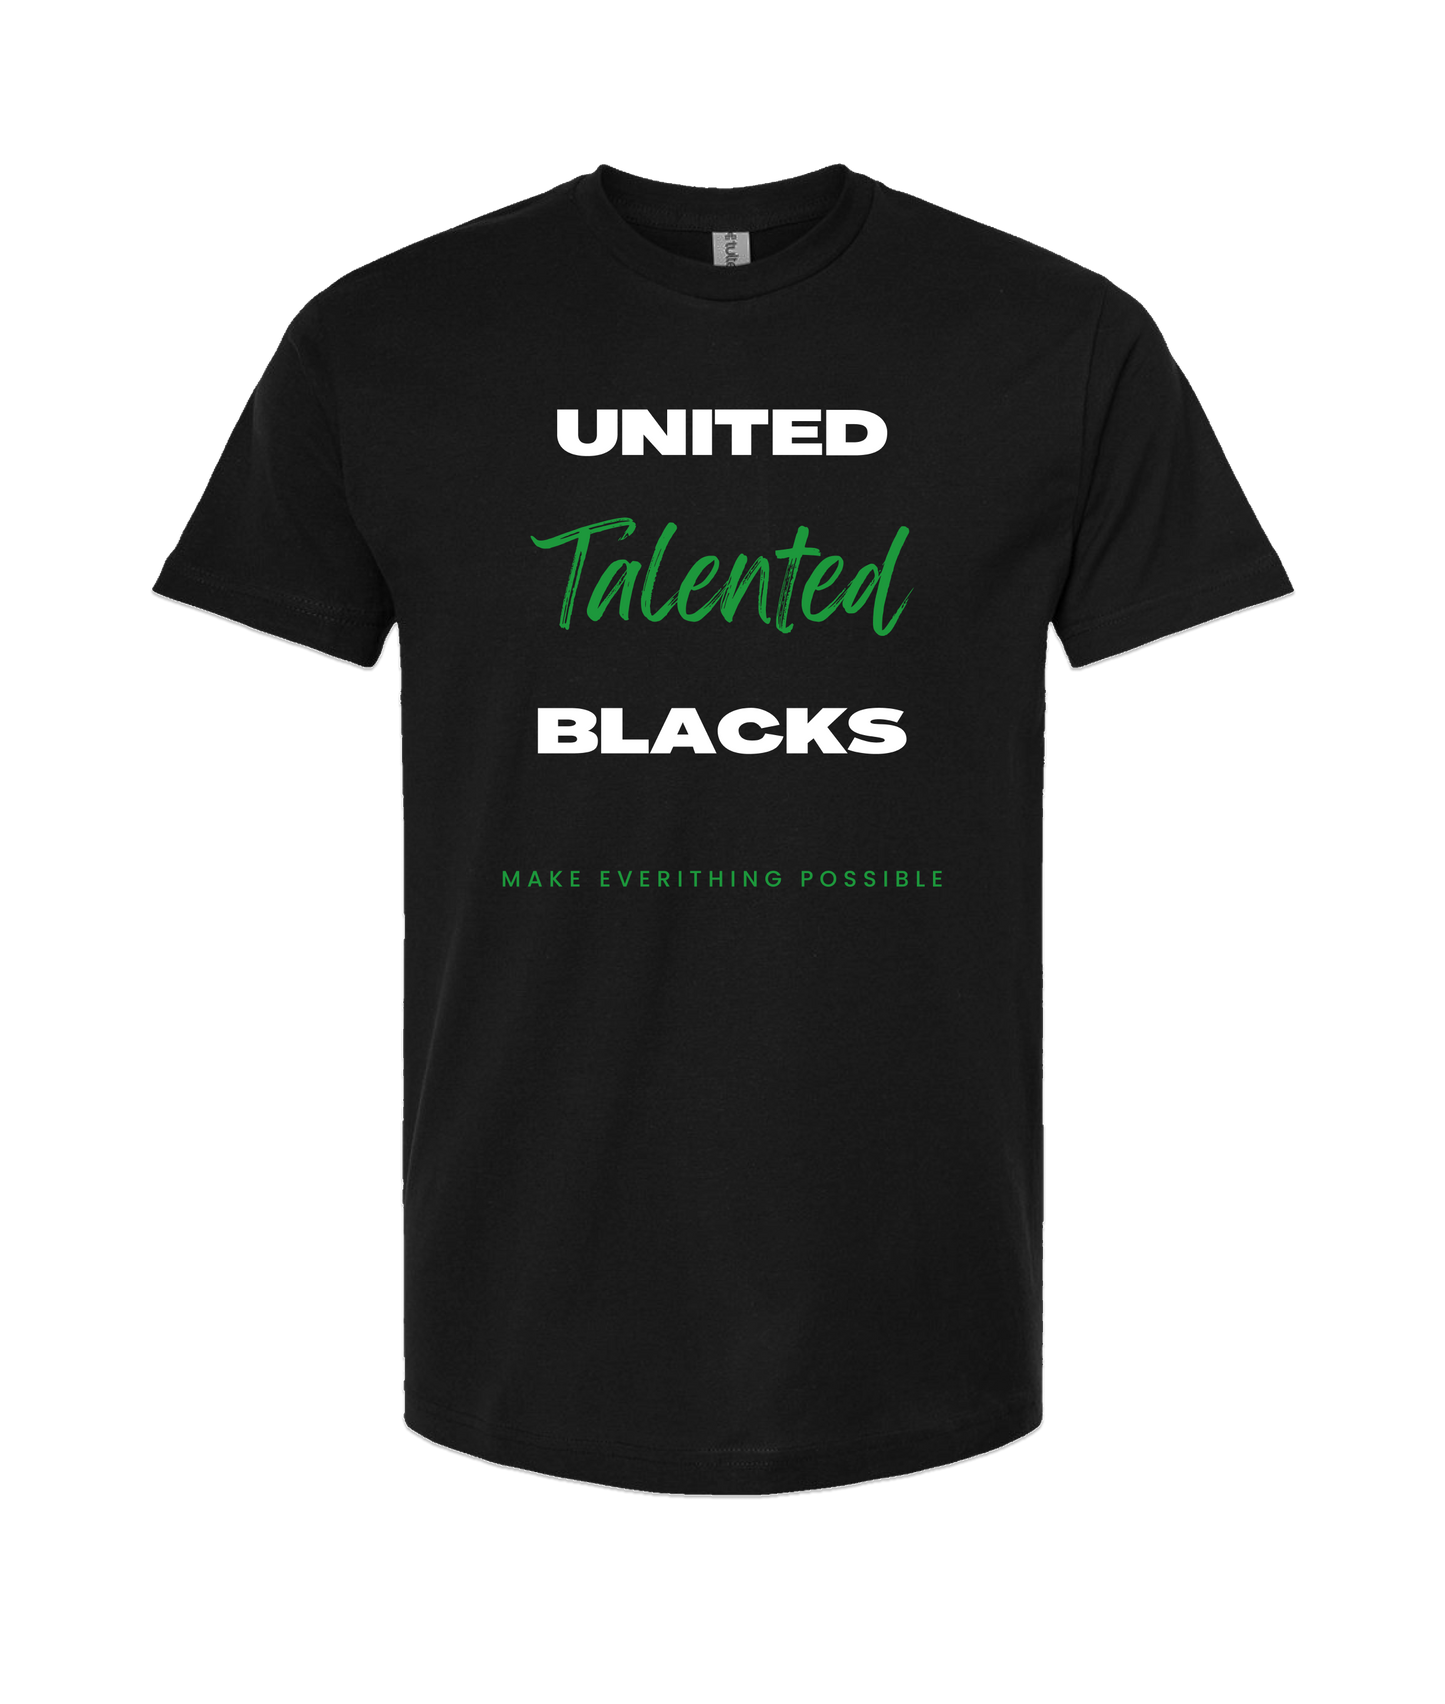 Talented Black - MAKE EVERYTHING POSSIBLE - Black T Shirt